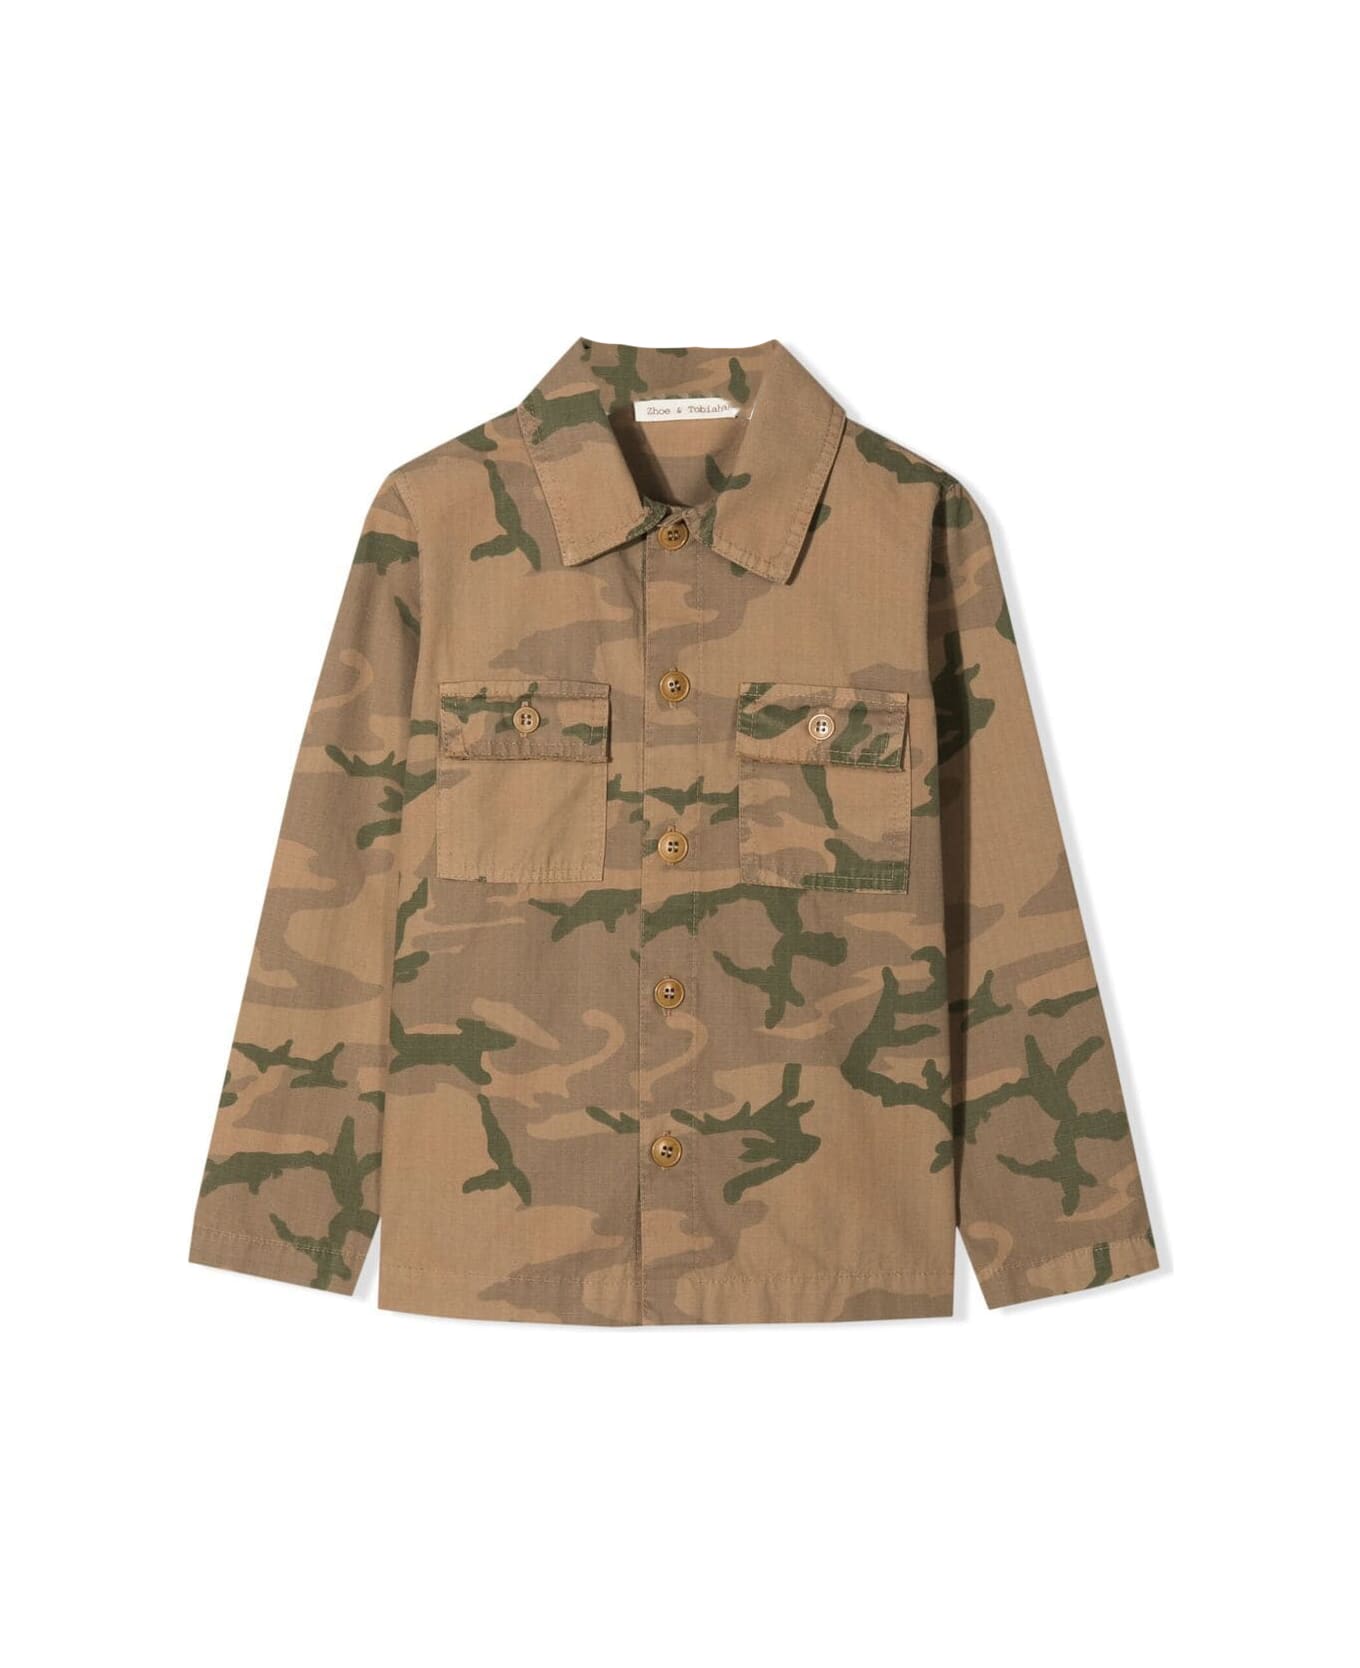 Zhoe & Tobiah Shirt-jacket With Camouflage Print - Variante unica